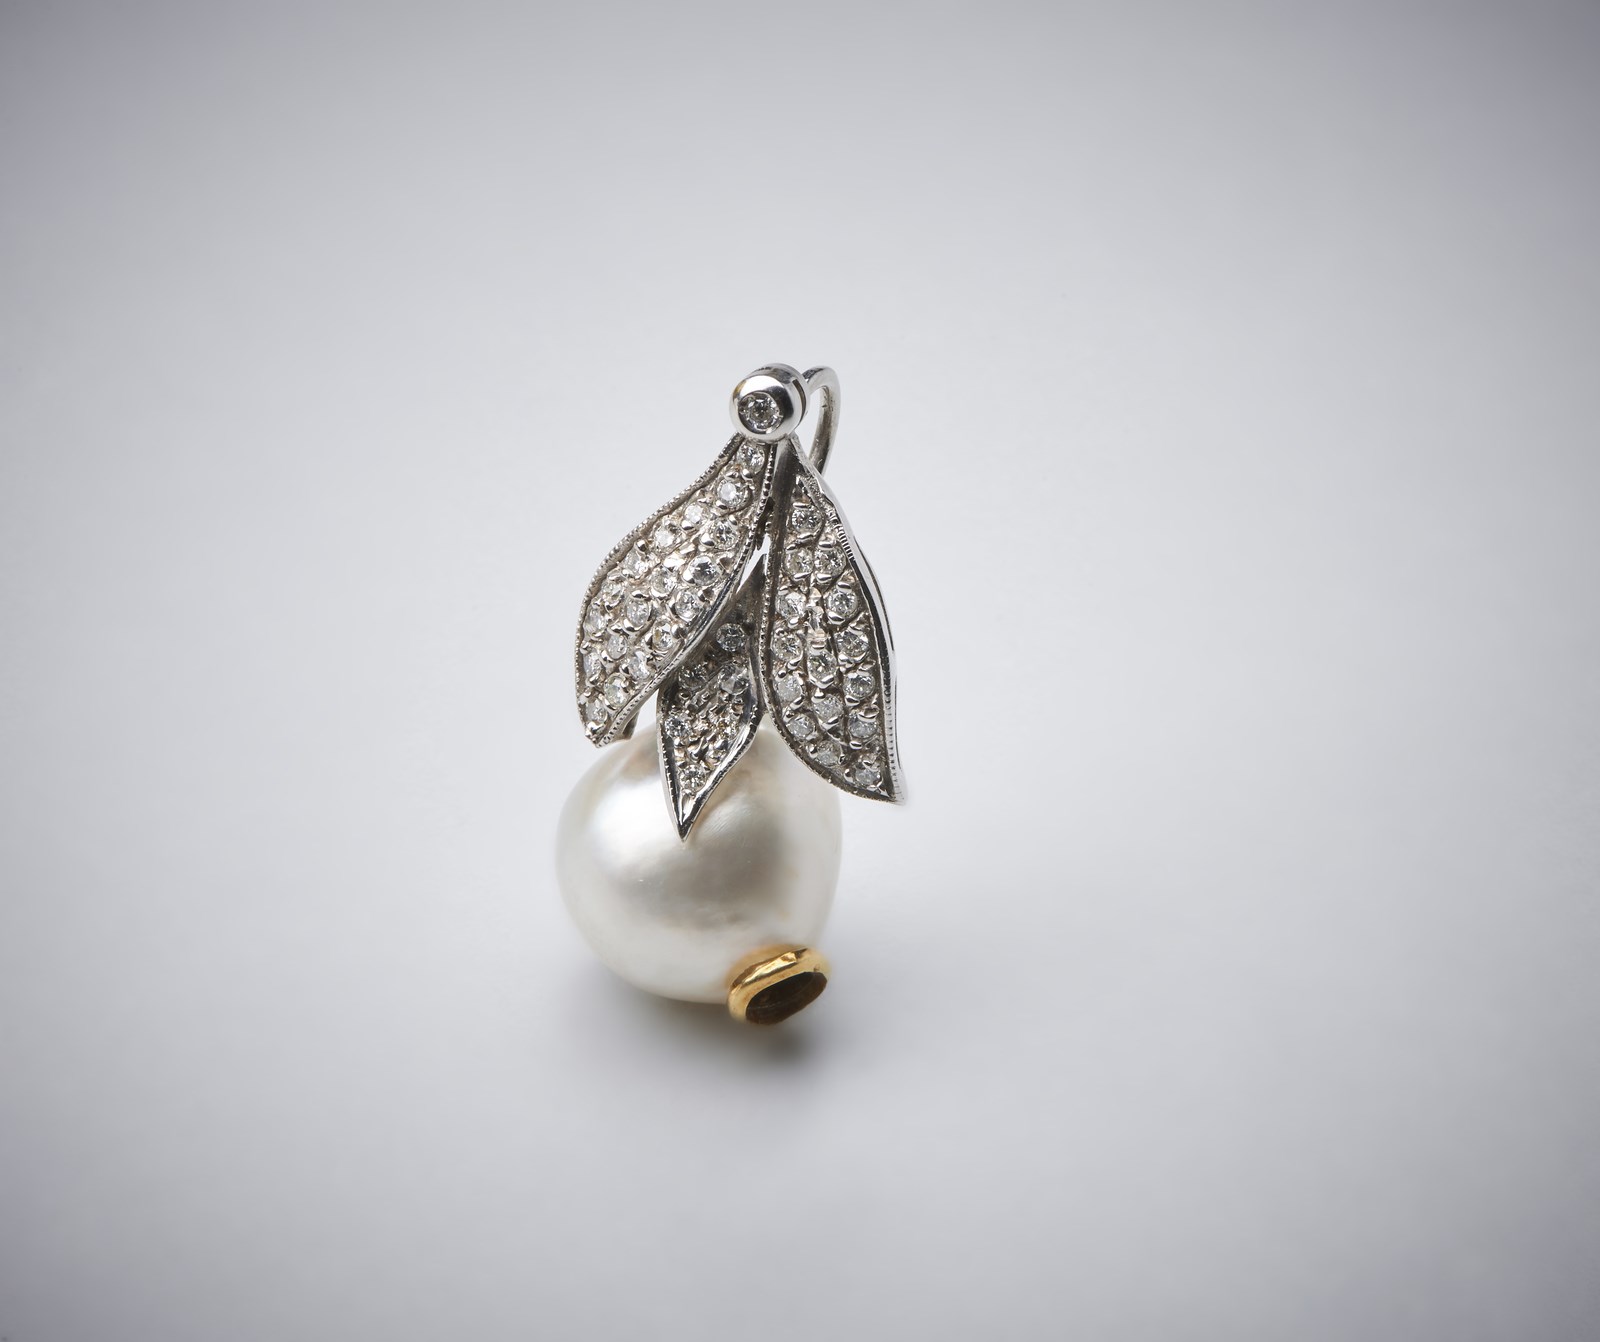 Leaf-shaped pendant with pavè of brilliant cut white diamonds of about 1.50 ct in 750/1000 white gold and 15.00 mm cultured Australian pearl. (. )